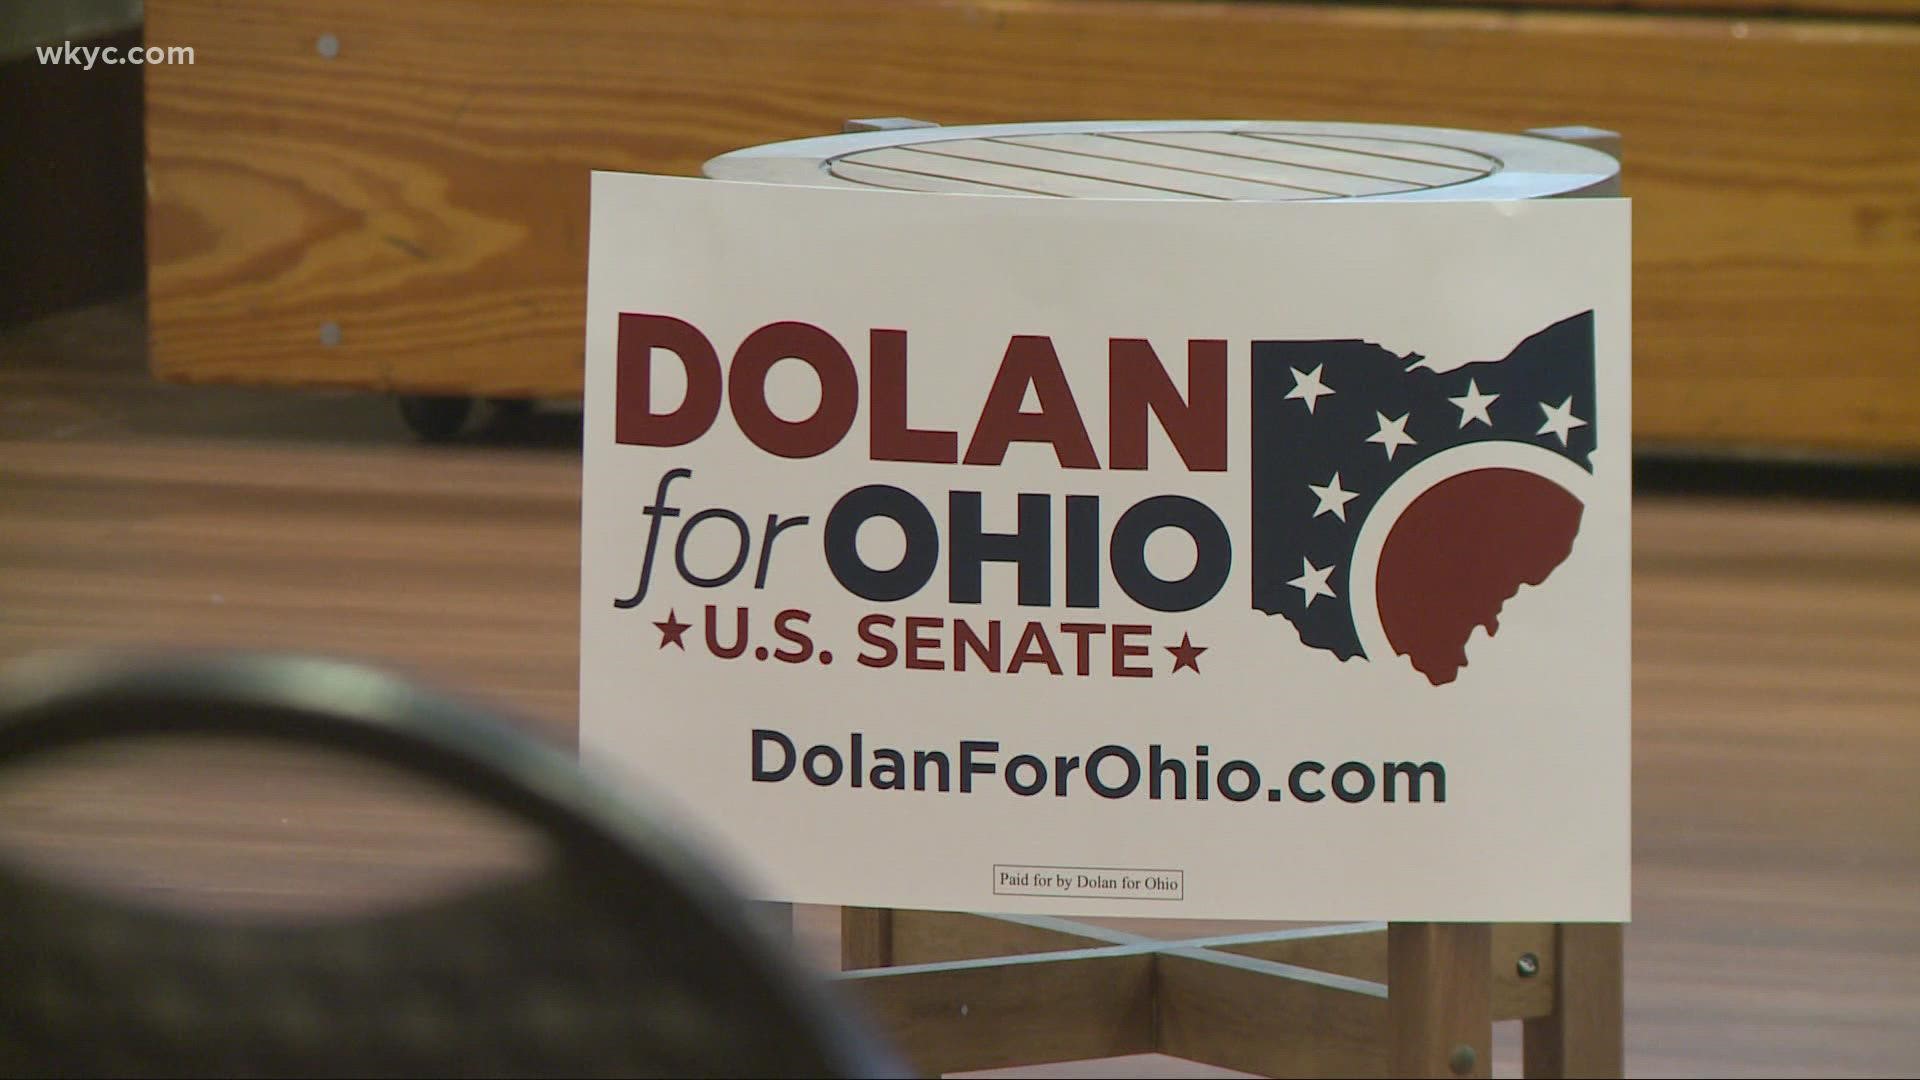 Dolan officially announced his run last week, but made his first stop on Saturday. He says he is not running on the platform that the 2020 election was stolen.